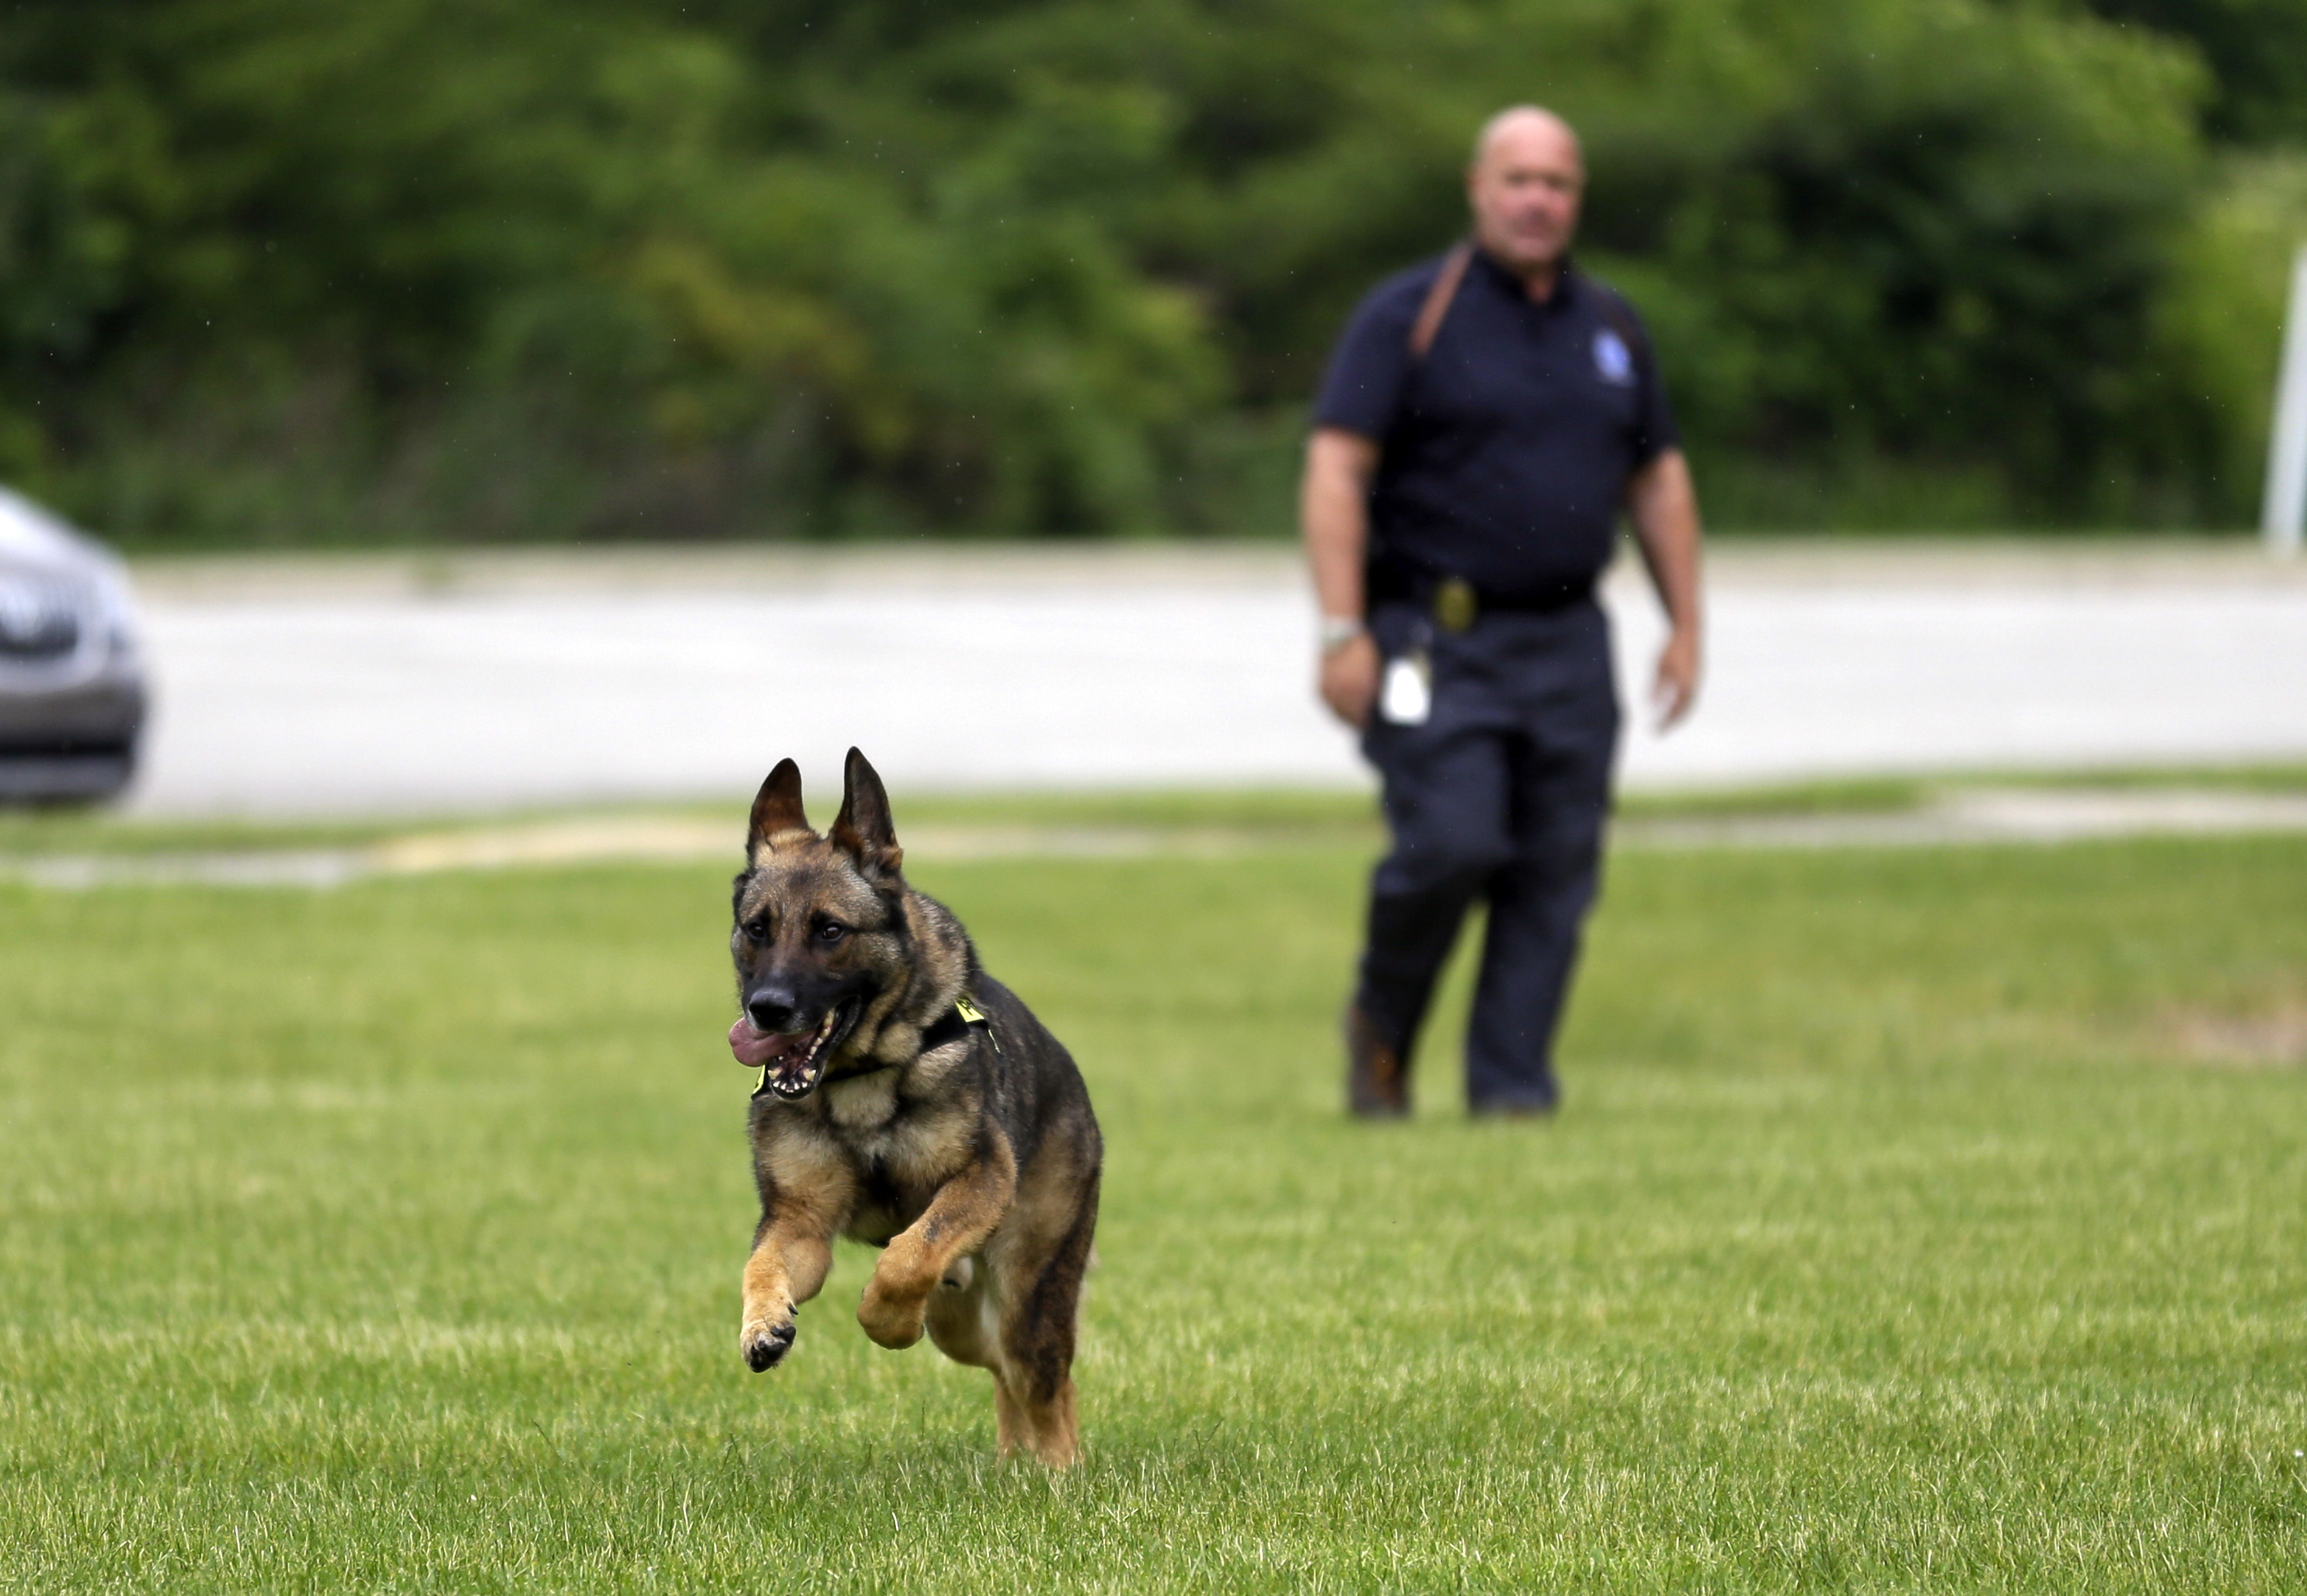 CORRECTS SPELLING OF NAME TO AXEL, NOT AXLE - In this photo taken June 1, 2015, Lawrence Police Department Officer Matthew Hickey watches as his dog Axel performs a search drill at a school in Indianapolis. Axel, a 5-year-old German shepherd that spent three years in Afghanistan as a search and narcotics dog, will spend the rest of his working career in Indianapolis, where hes been assigned to the Lawrence Township School District police force. (AP Photo/Michael Conroy)